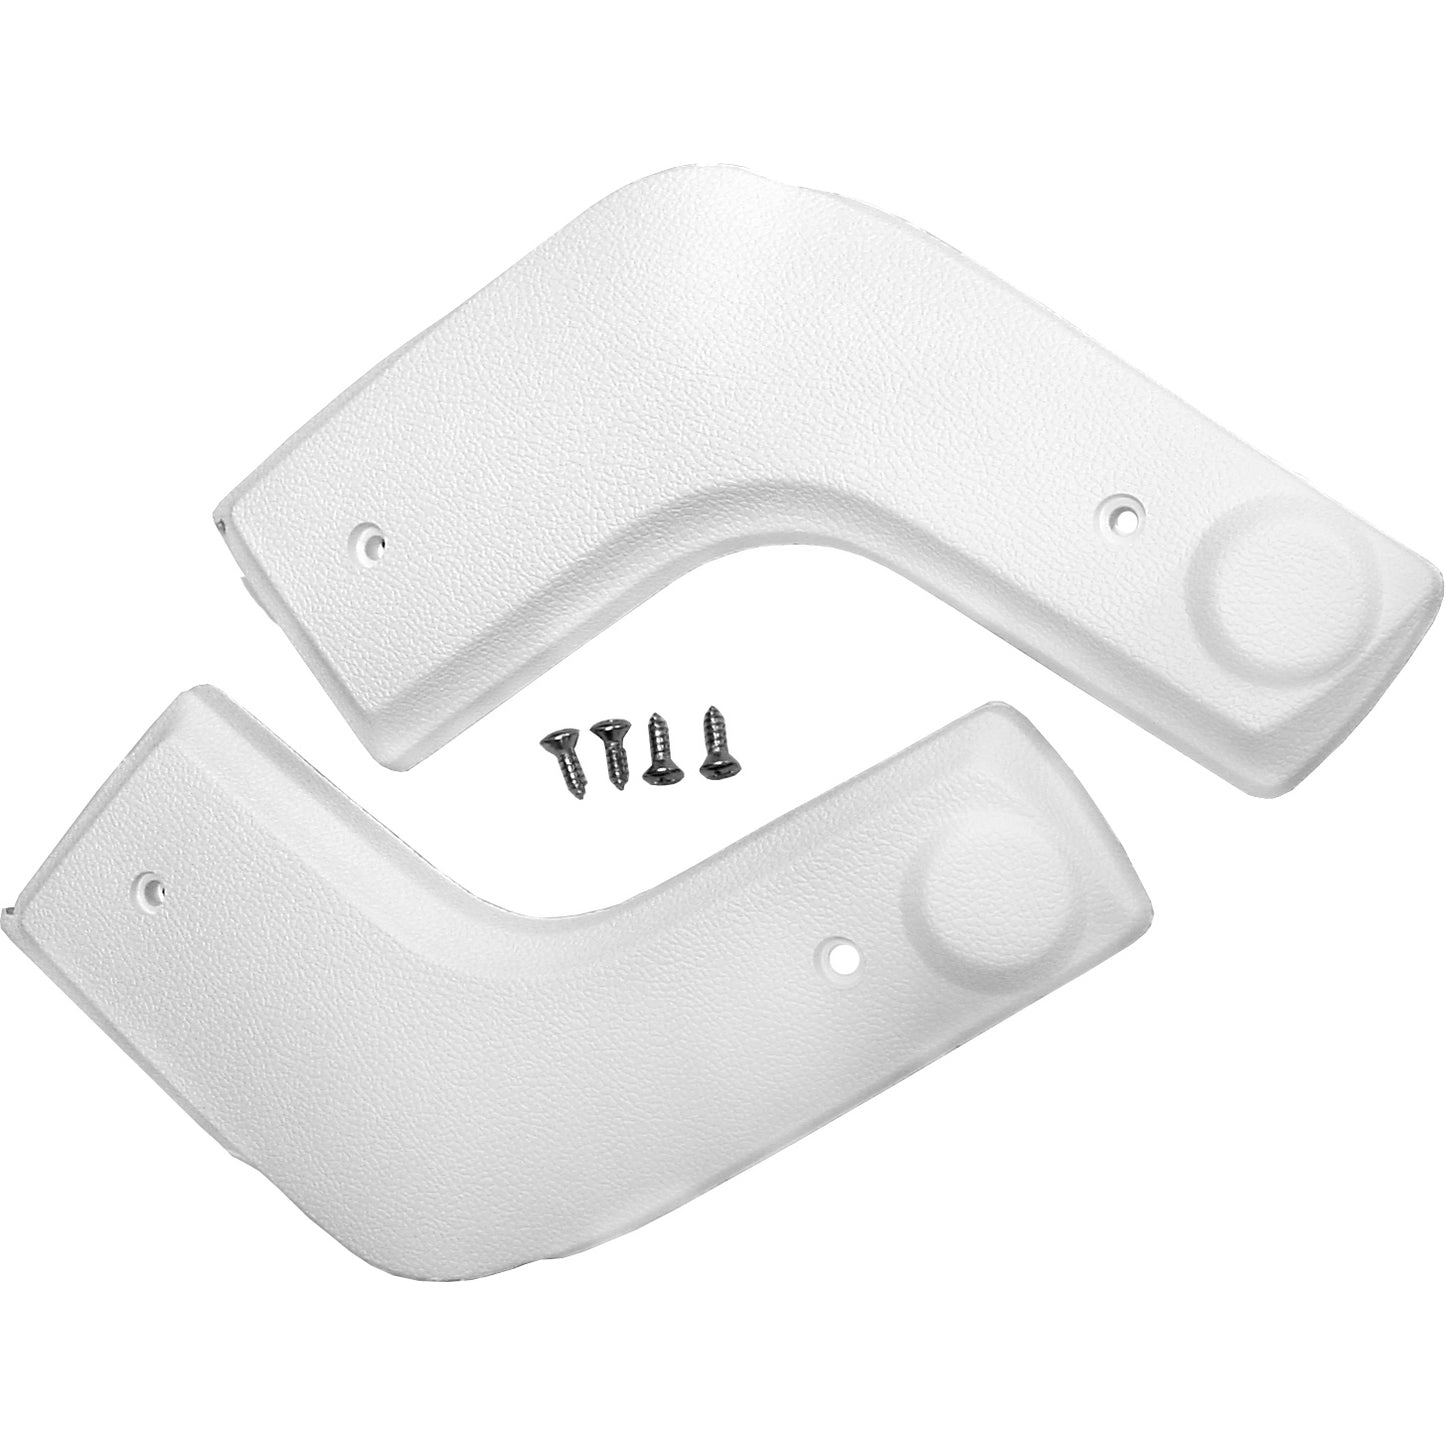 70/72 BENCH HINGE COVERS - WHT